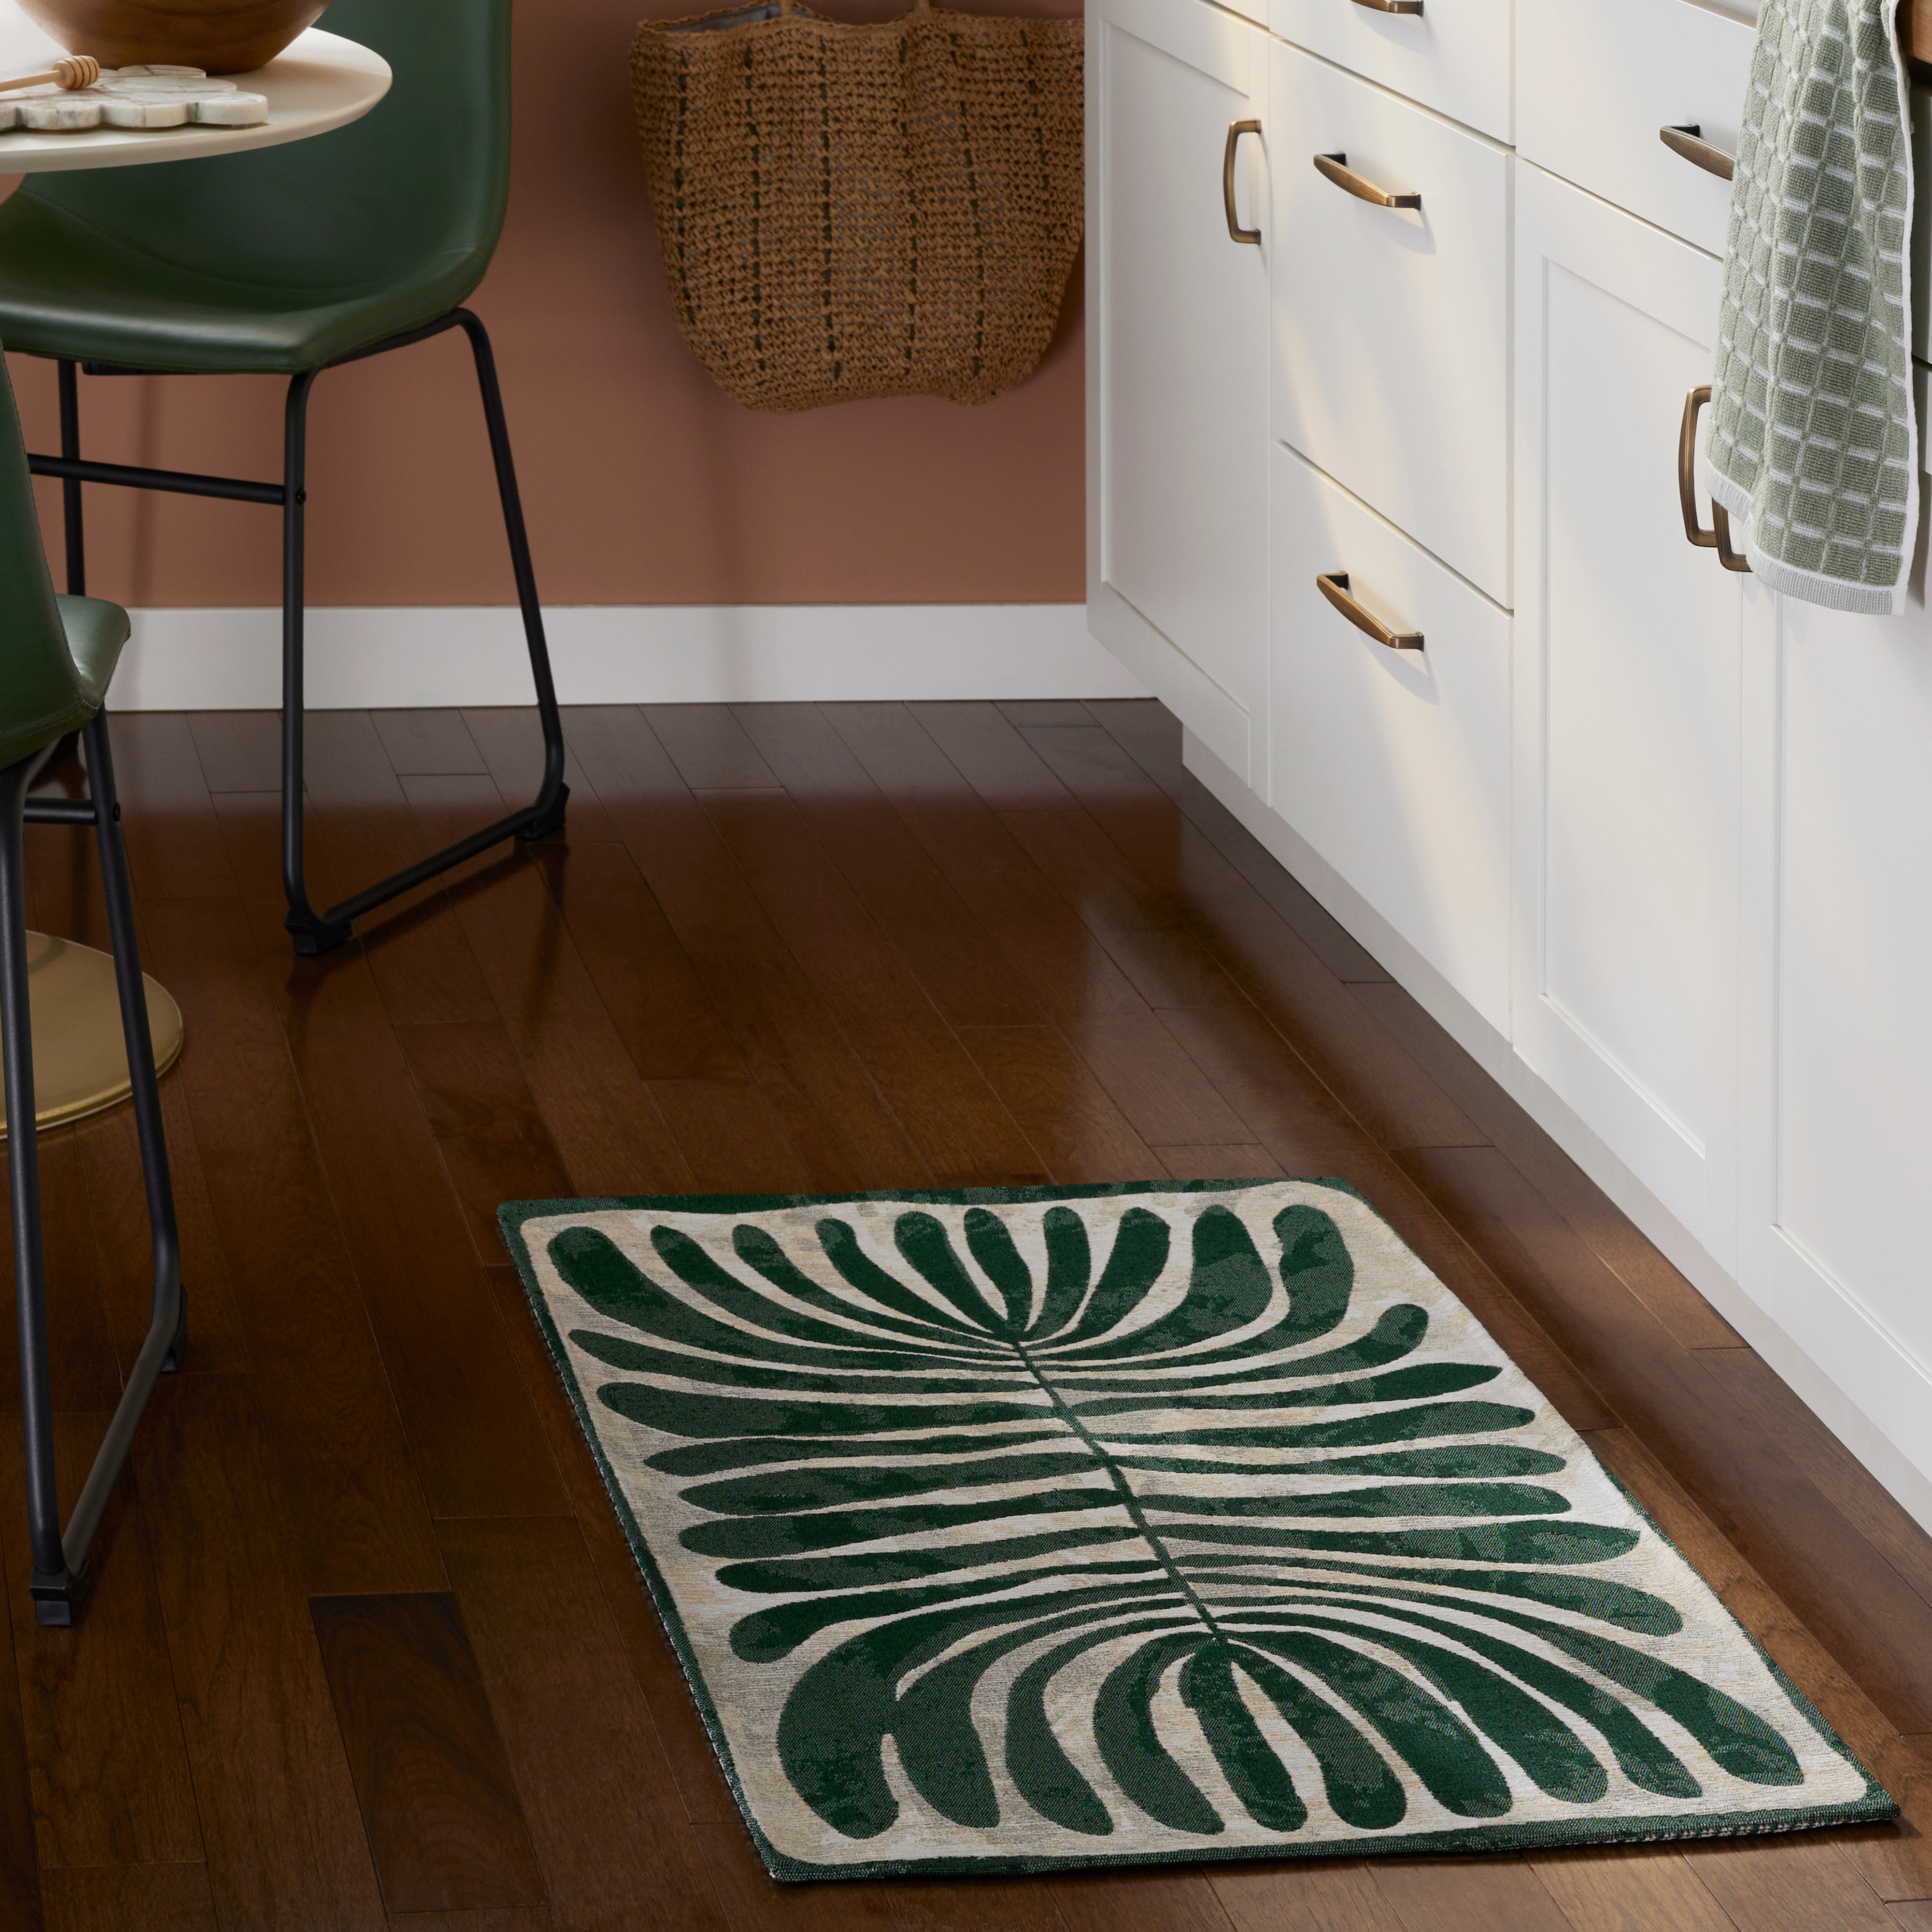 Town & Country Luxe Livie Matisse Cutout Everwash Non-Slip Backing Washable  Multi-Use Kitchen Mat